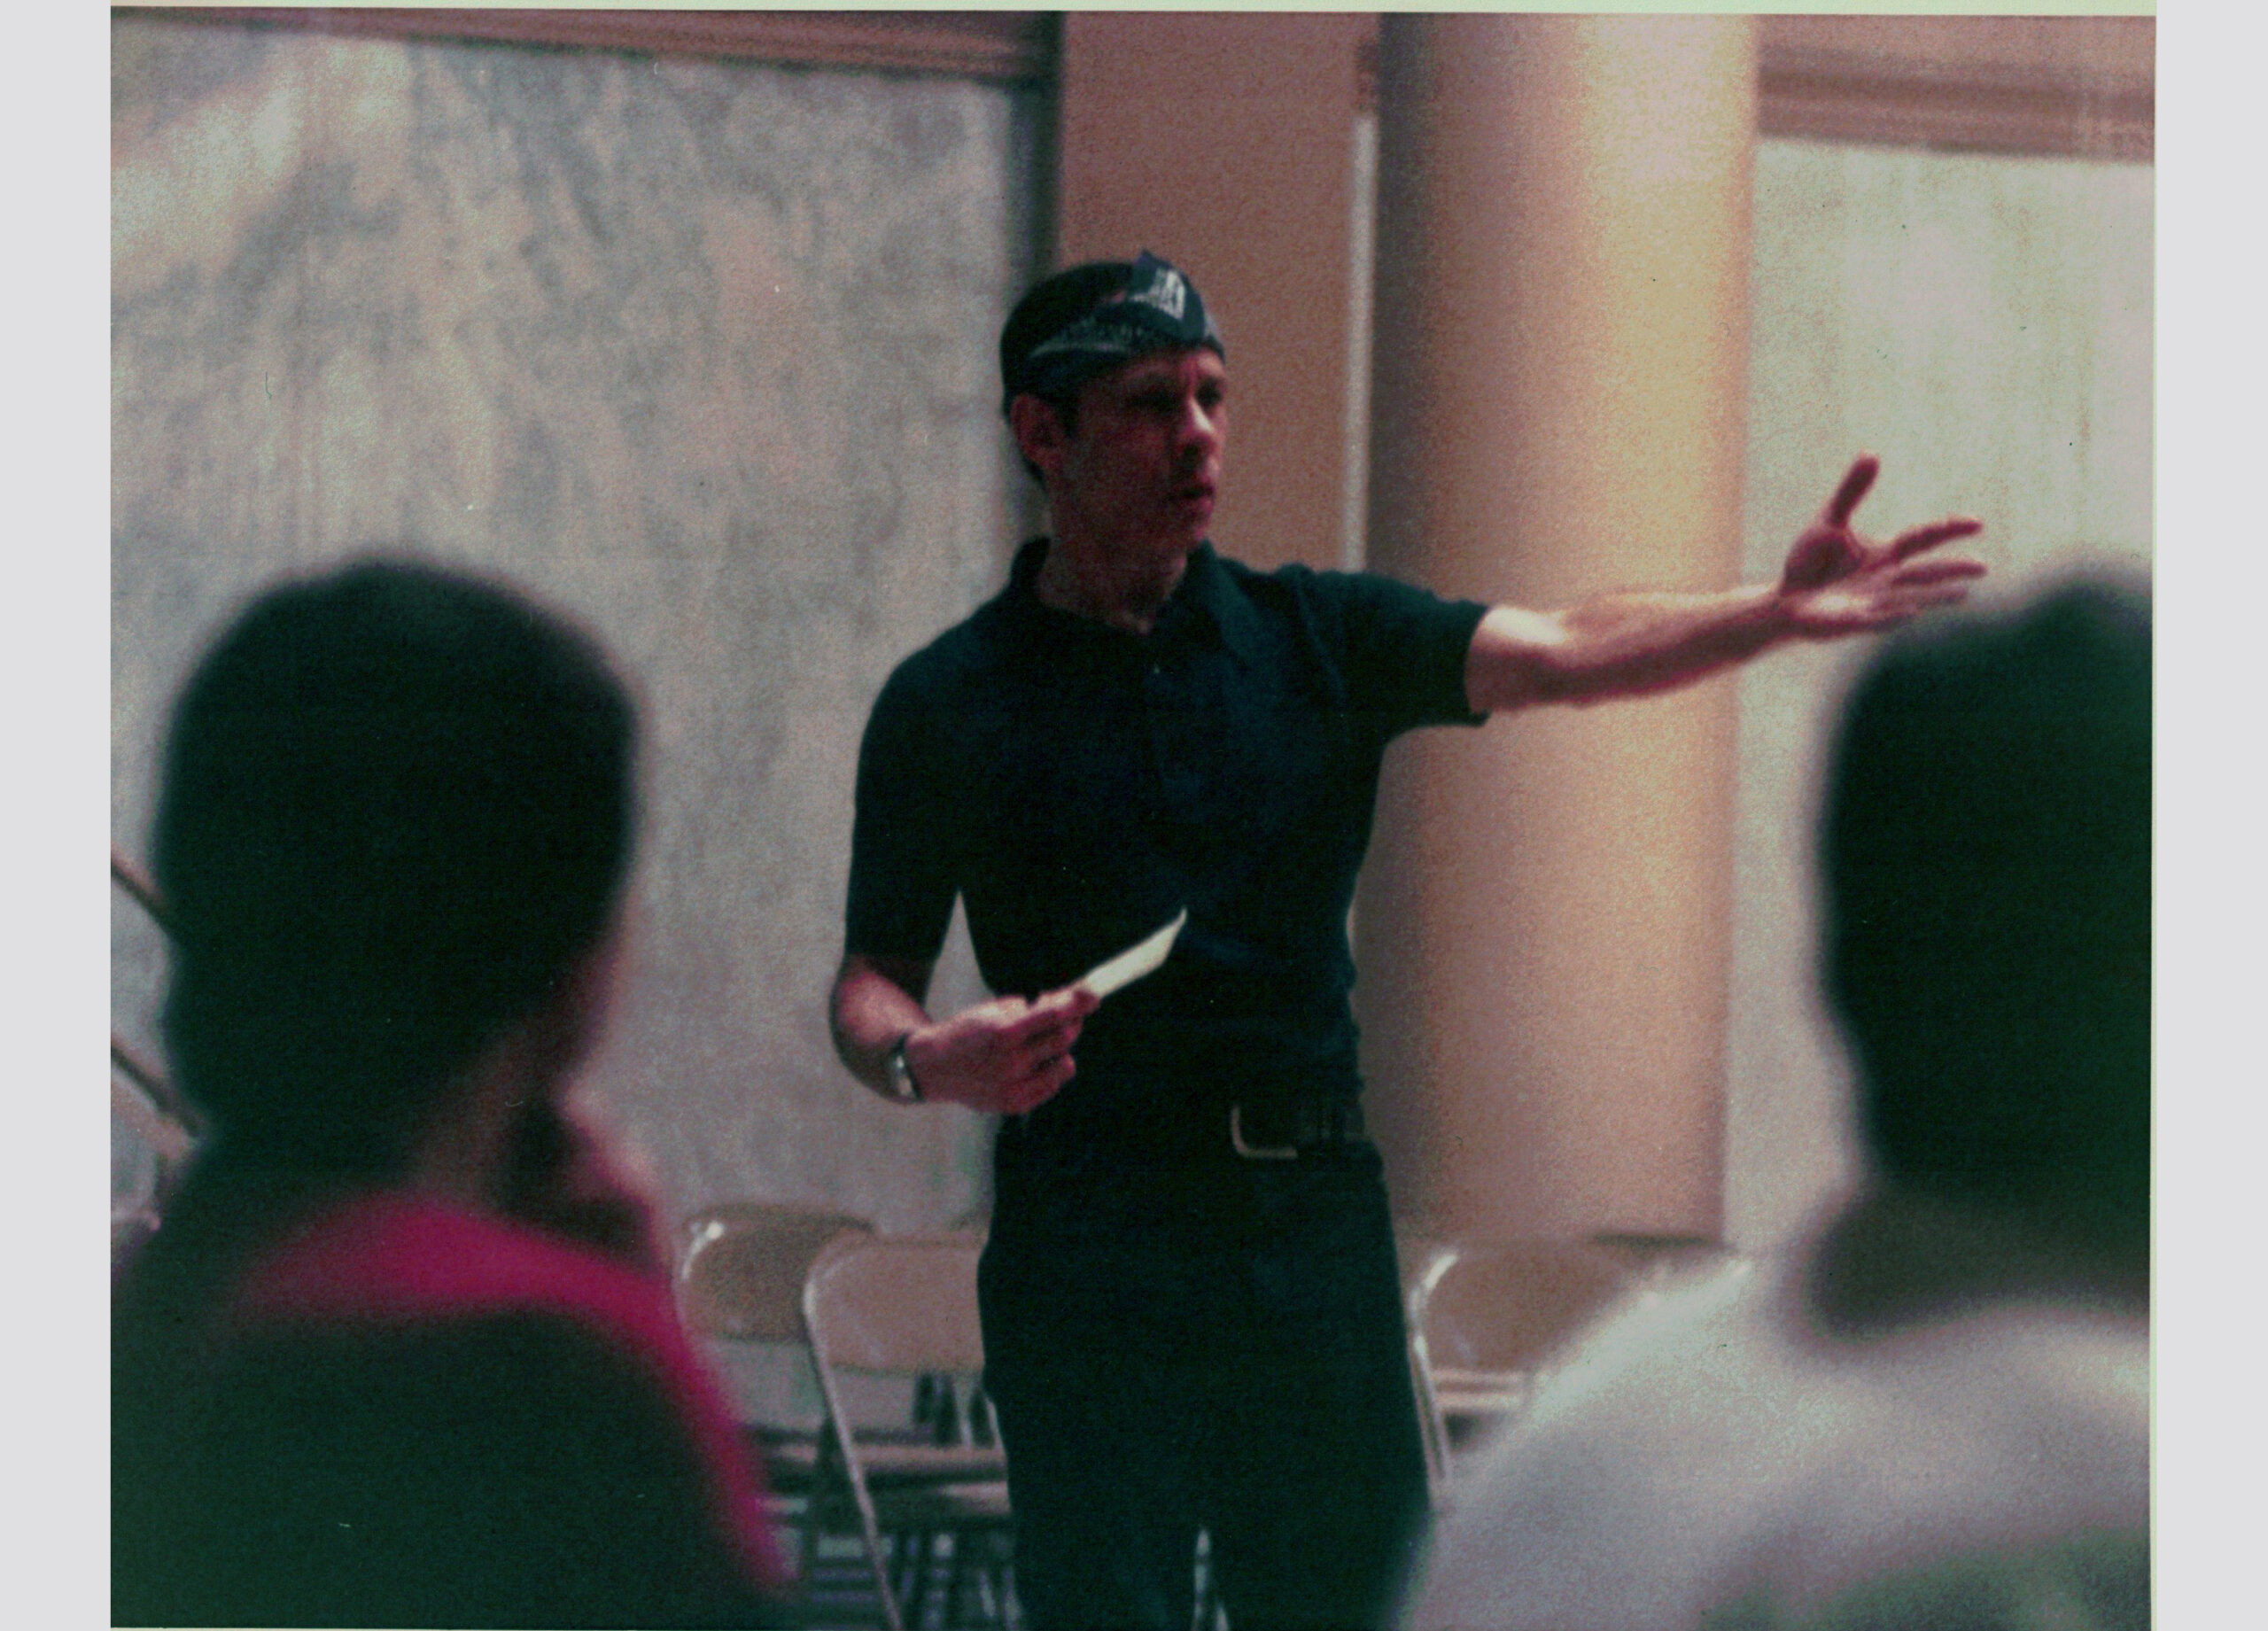 Perez—wearing a dark shirt and pants and a bandanna around his forehead—is pictured mid-speech, gesturing emphatically with his left arm and holding a notecard in his right hand.